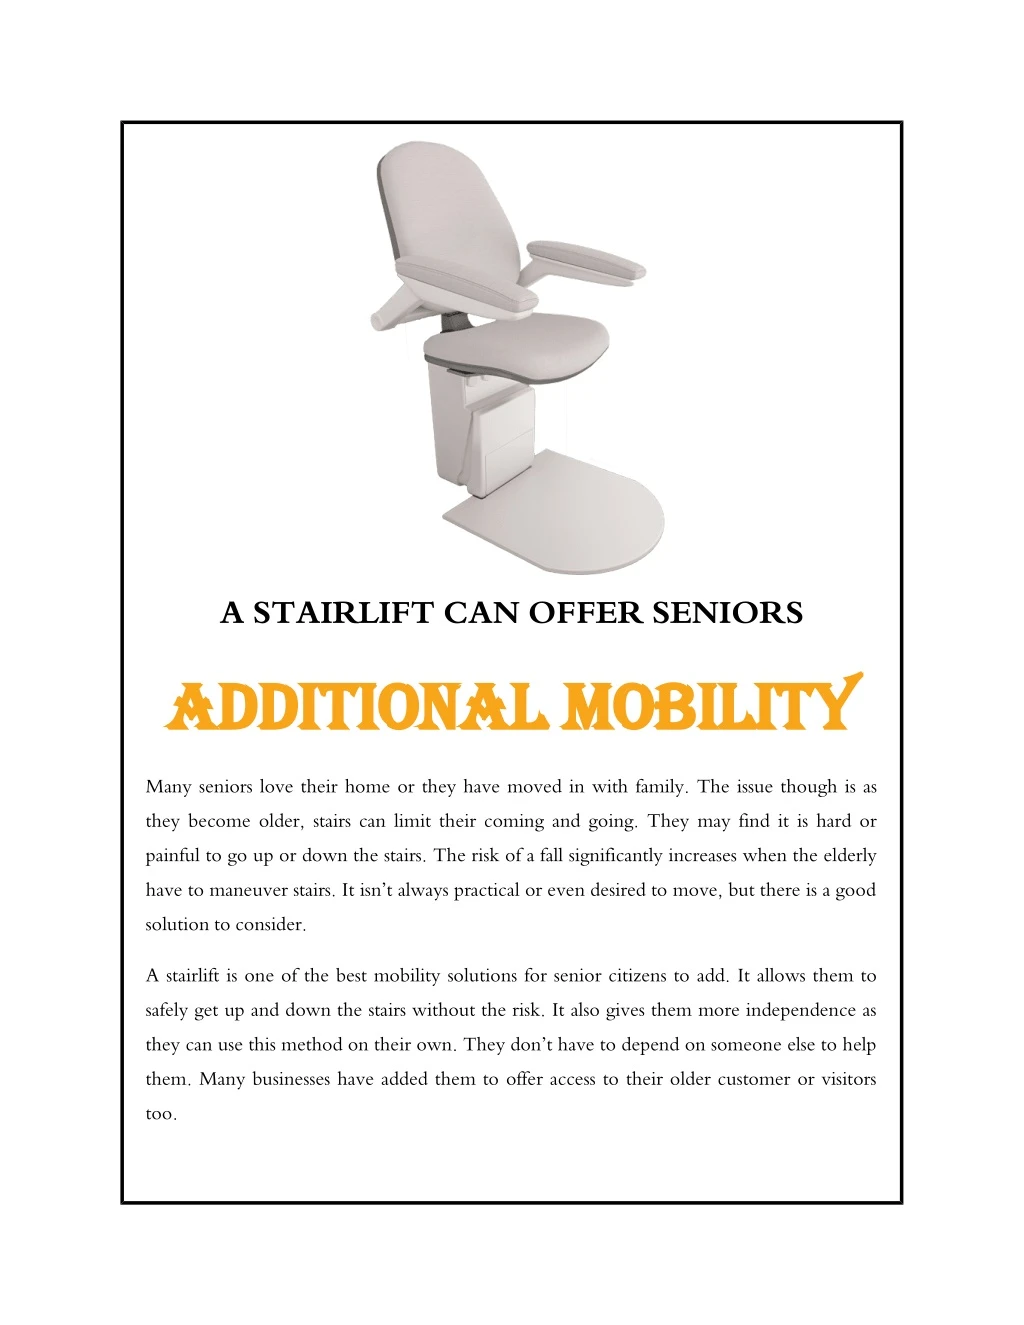 a stairlift can offer seniors additional mobility